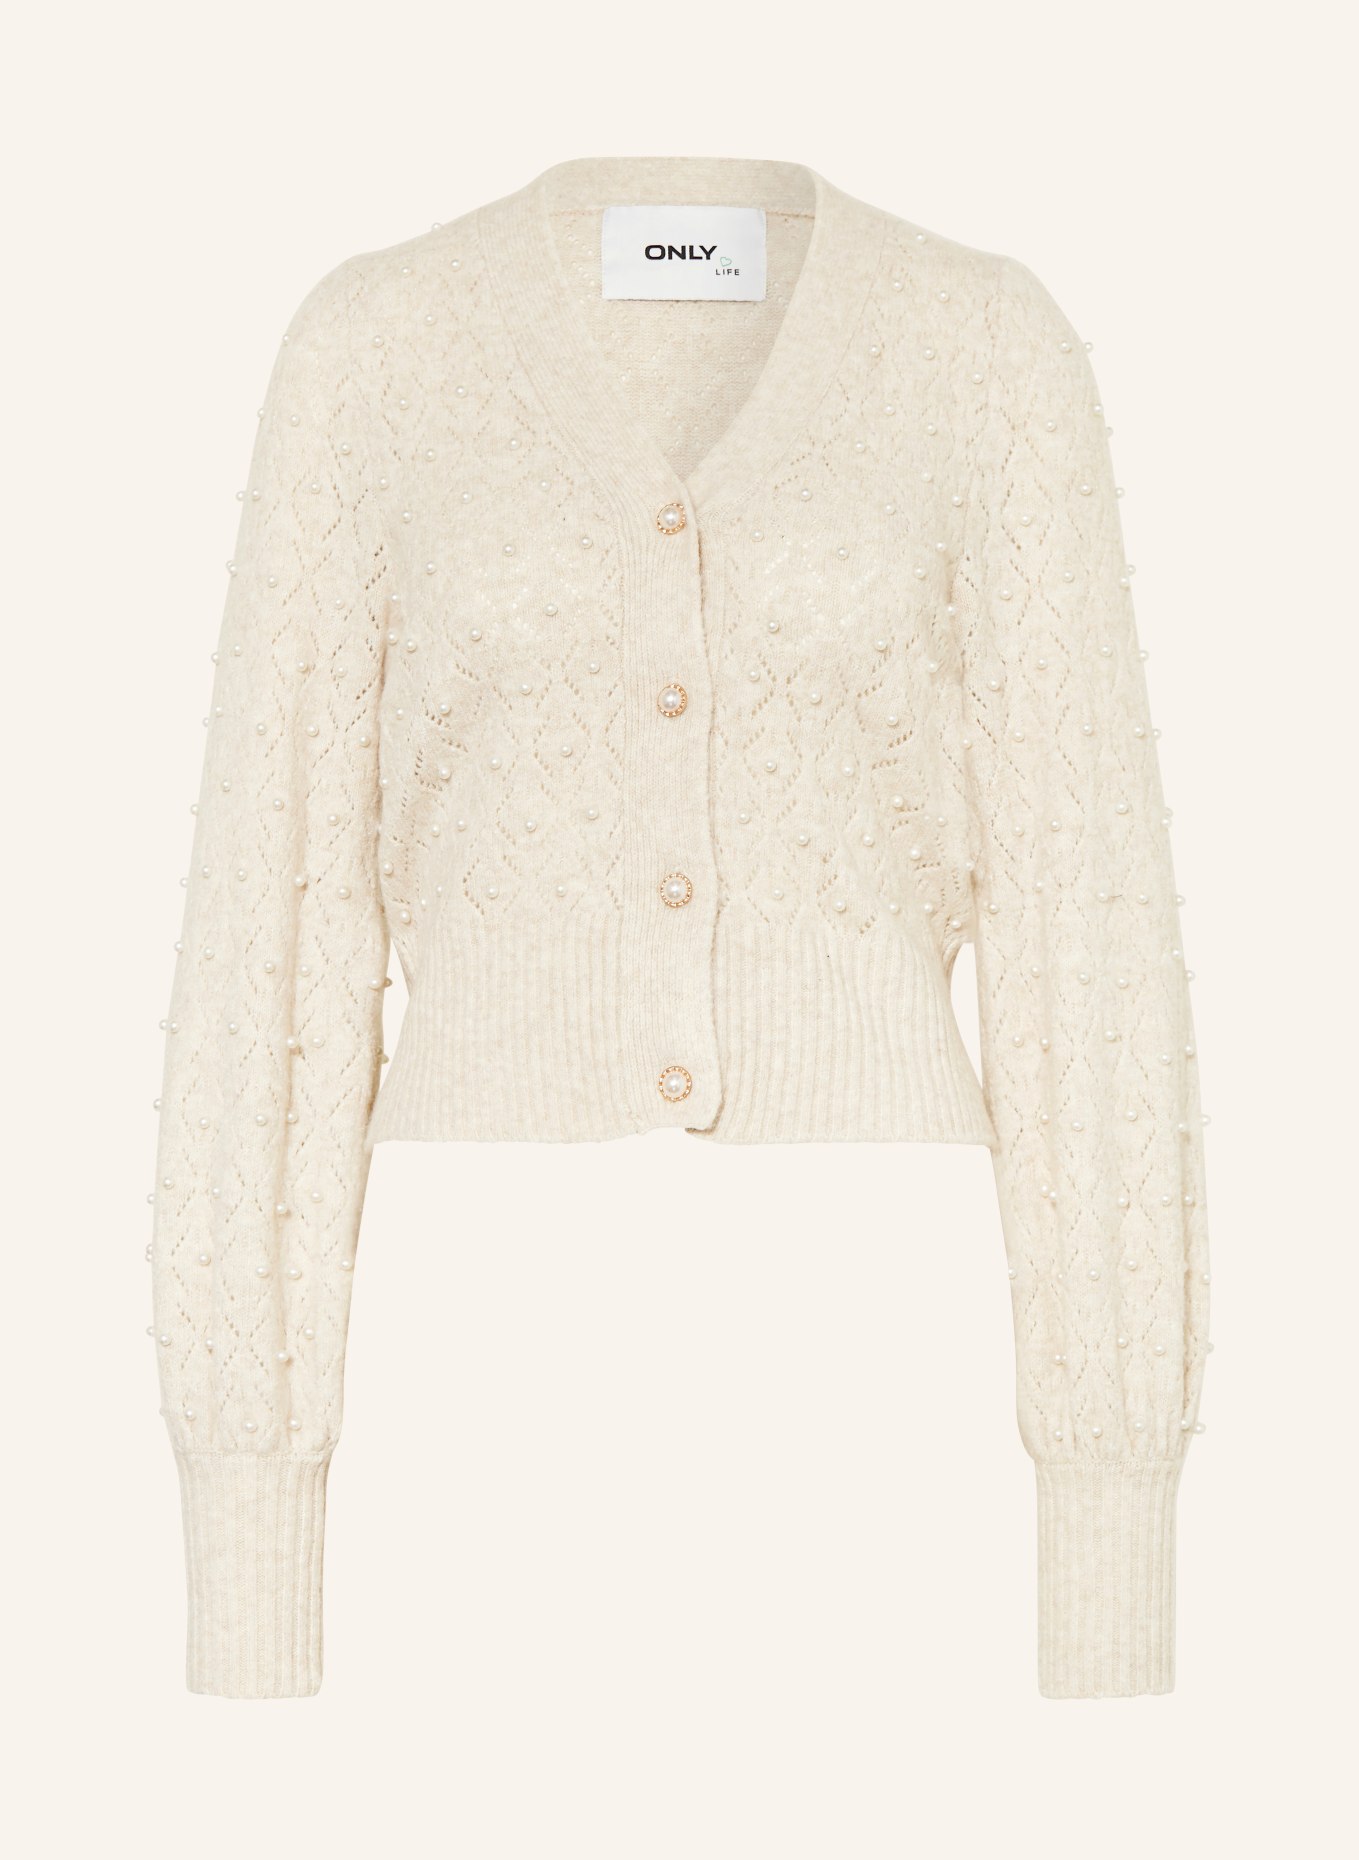 ONLY Cardigan with decorative beads, Color: BEIGE (Image 1)